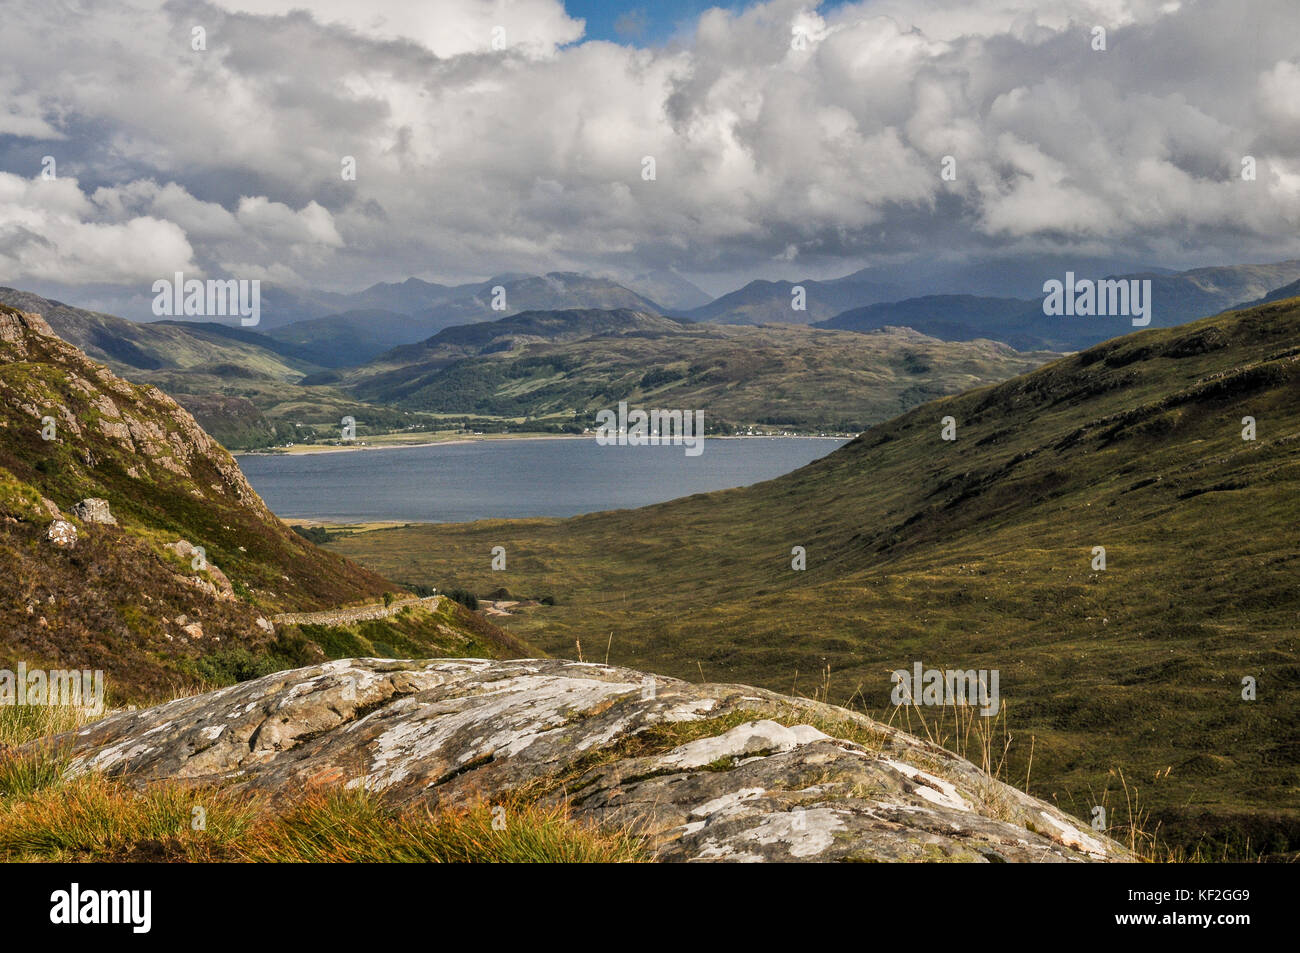 Hilltop view on the West Scottish Isle of Skye looking down the wild beautiful valley to the strait of Kyle Rhea and the mainland in the summer sun Stock Photo